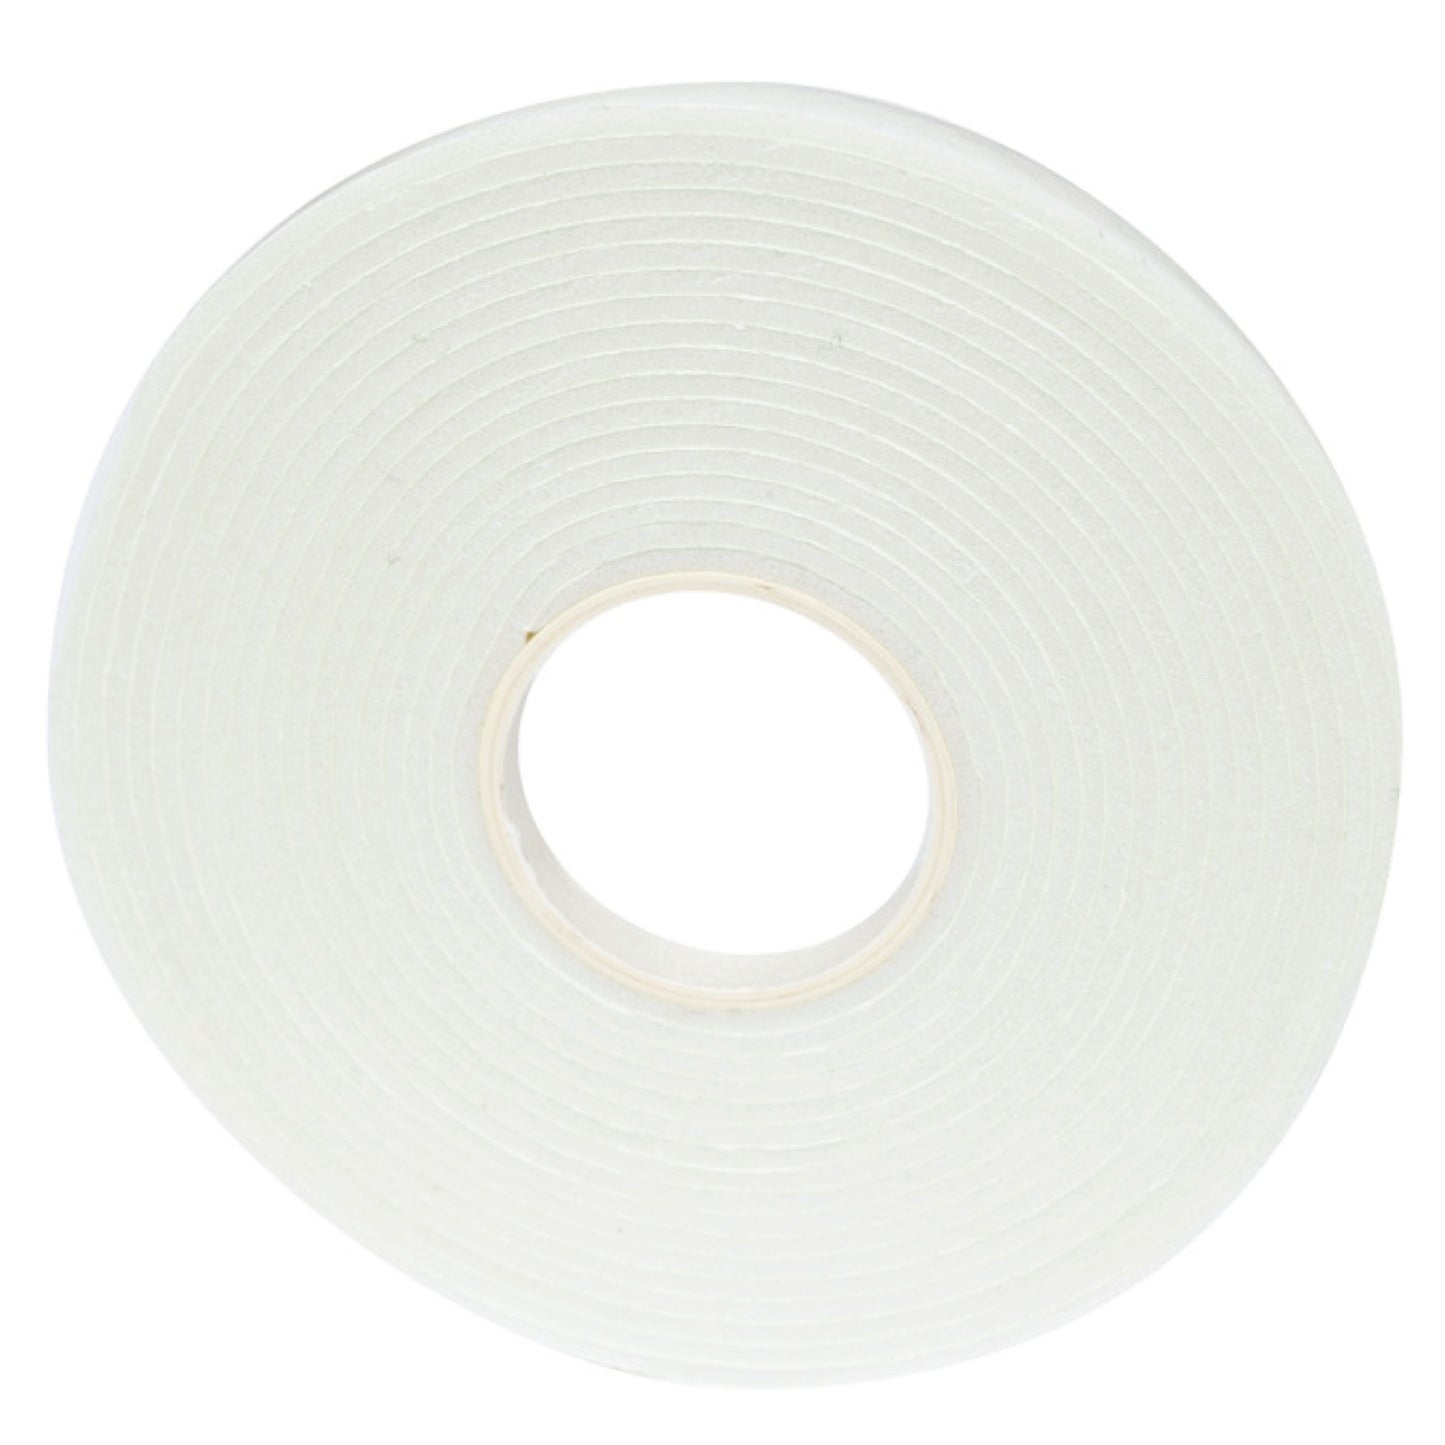 Sticky Thumb Double-Sided Foam Tape 3.94 Yards-White, 0.25"X1mm